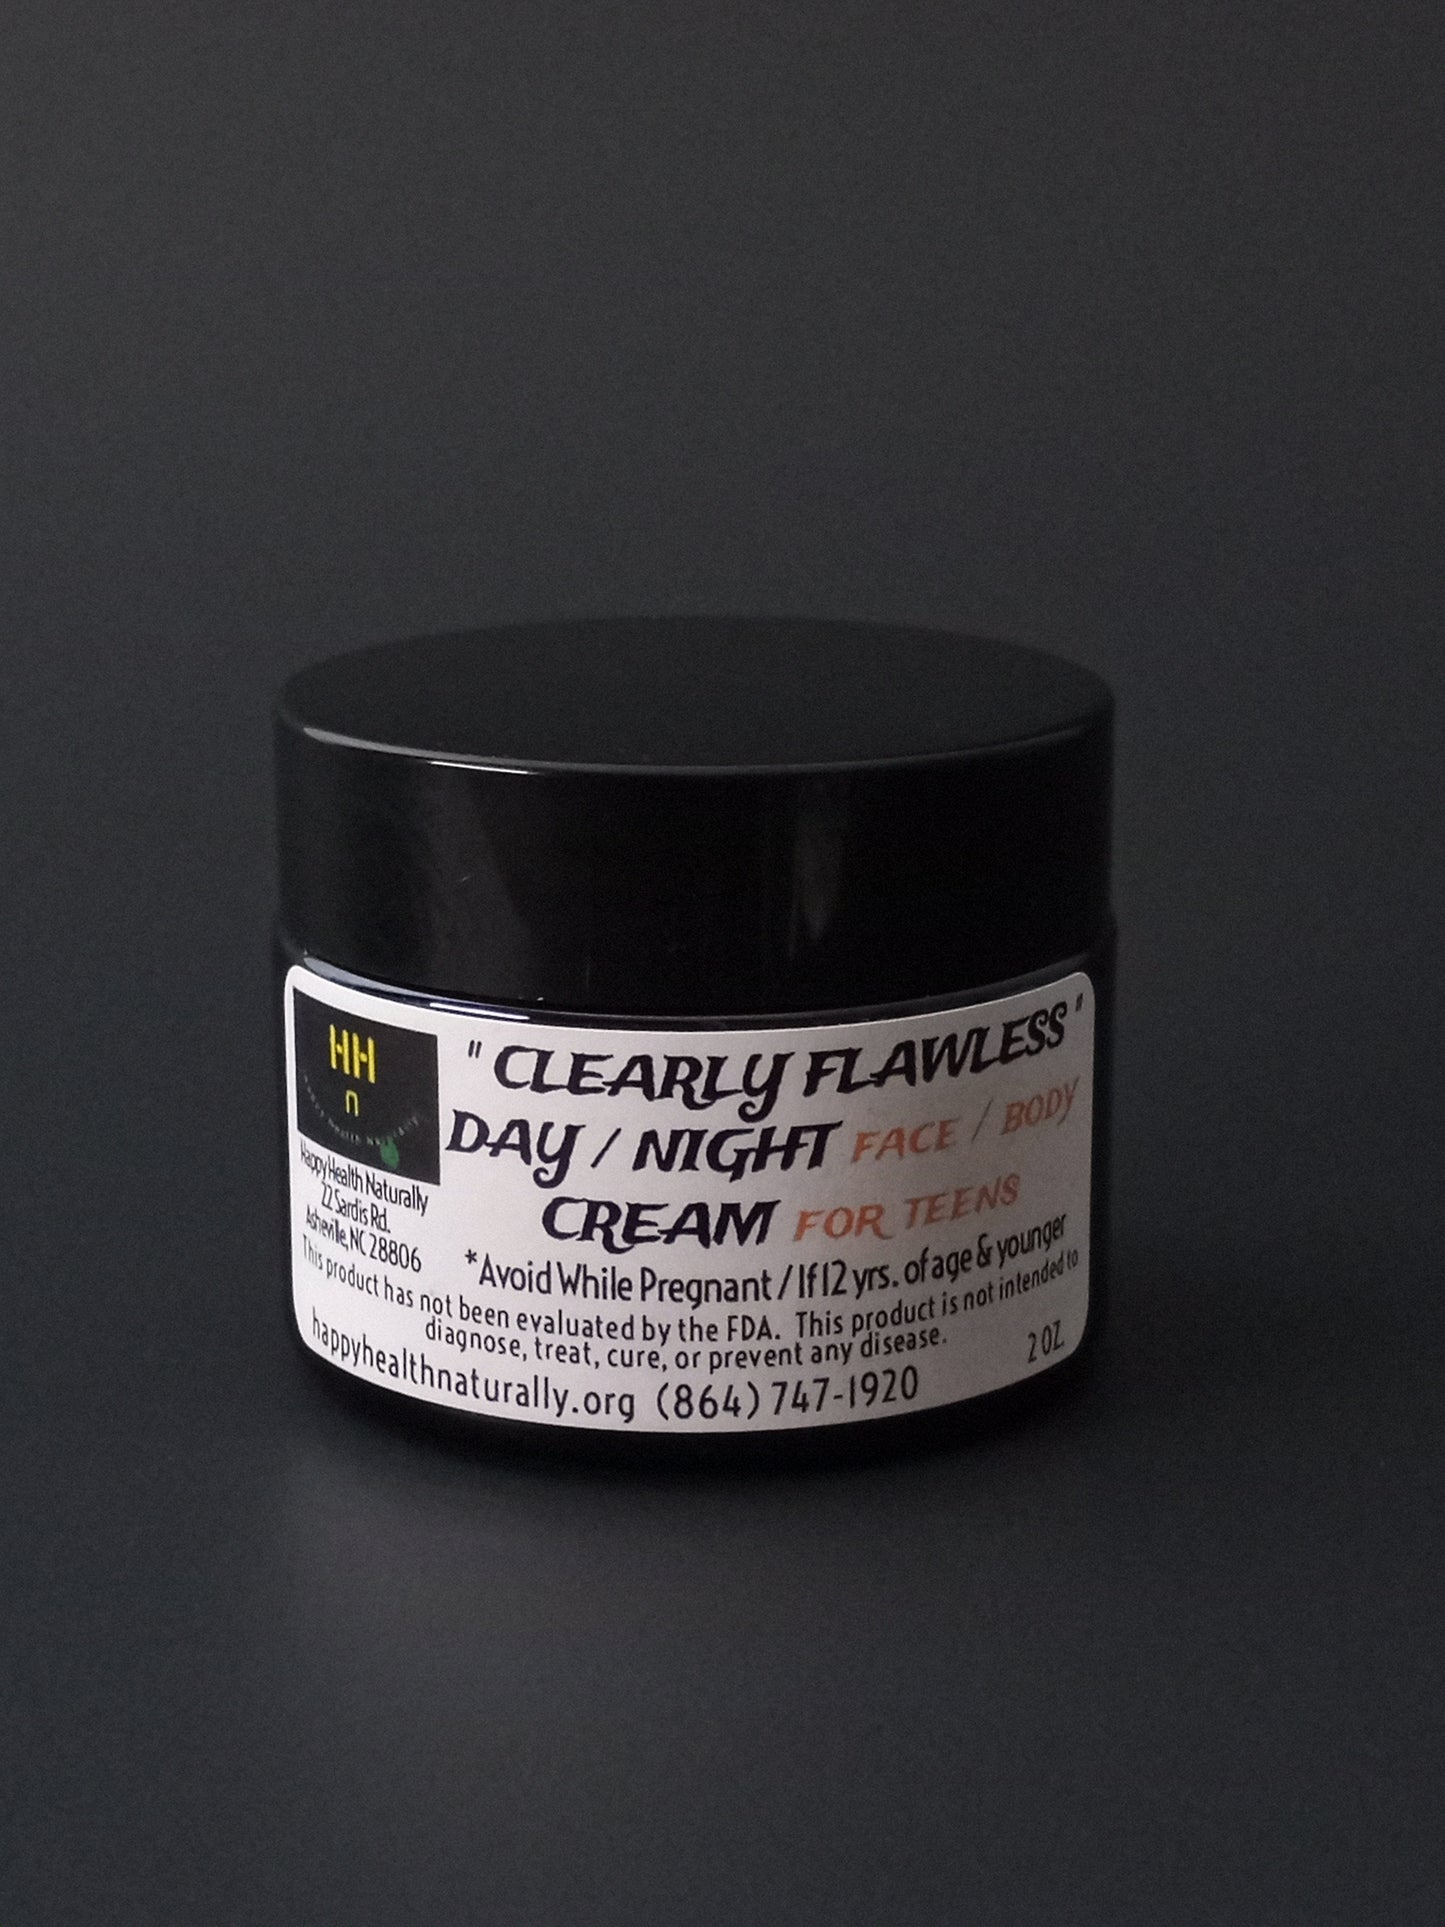 " CLEARLY FLAWLESS " DAY / NIGHT -FACE / BODY CREAM FOR TEENS 2 OZ.